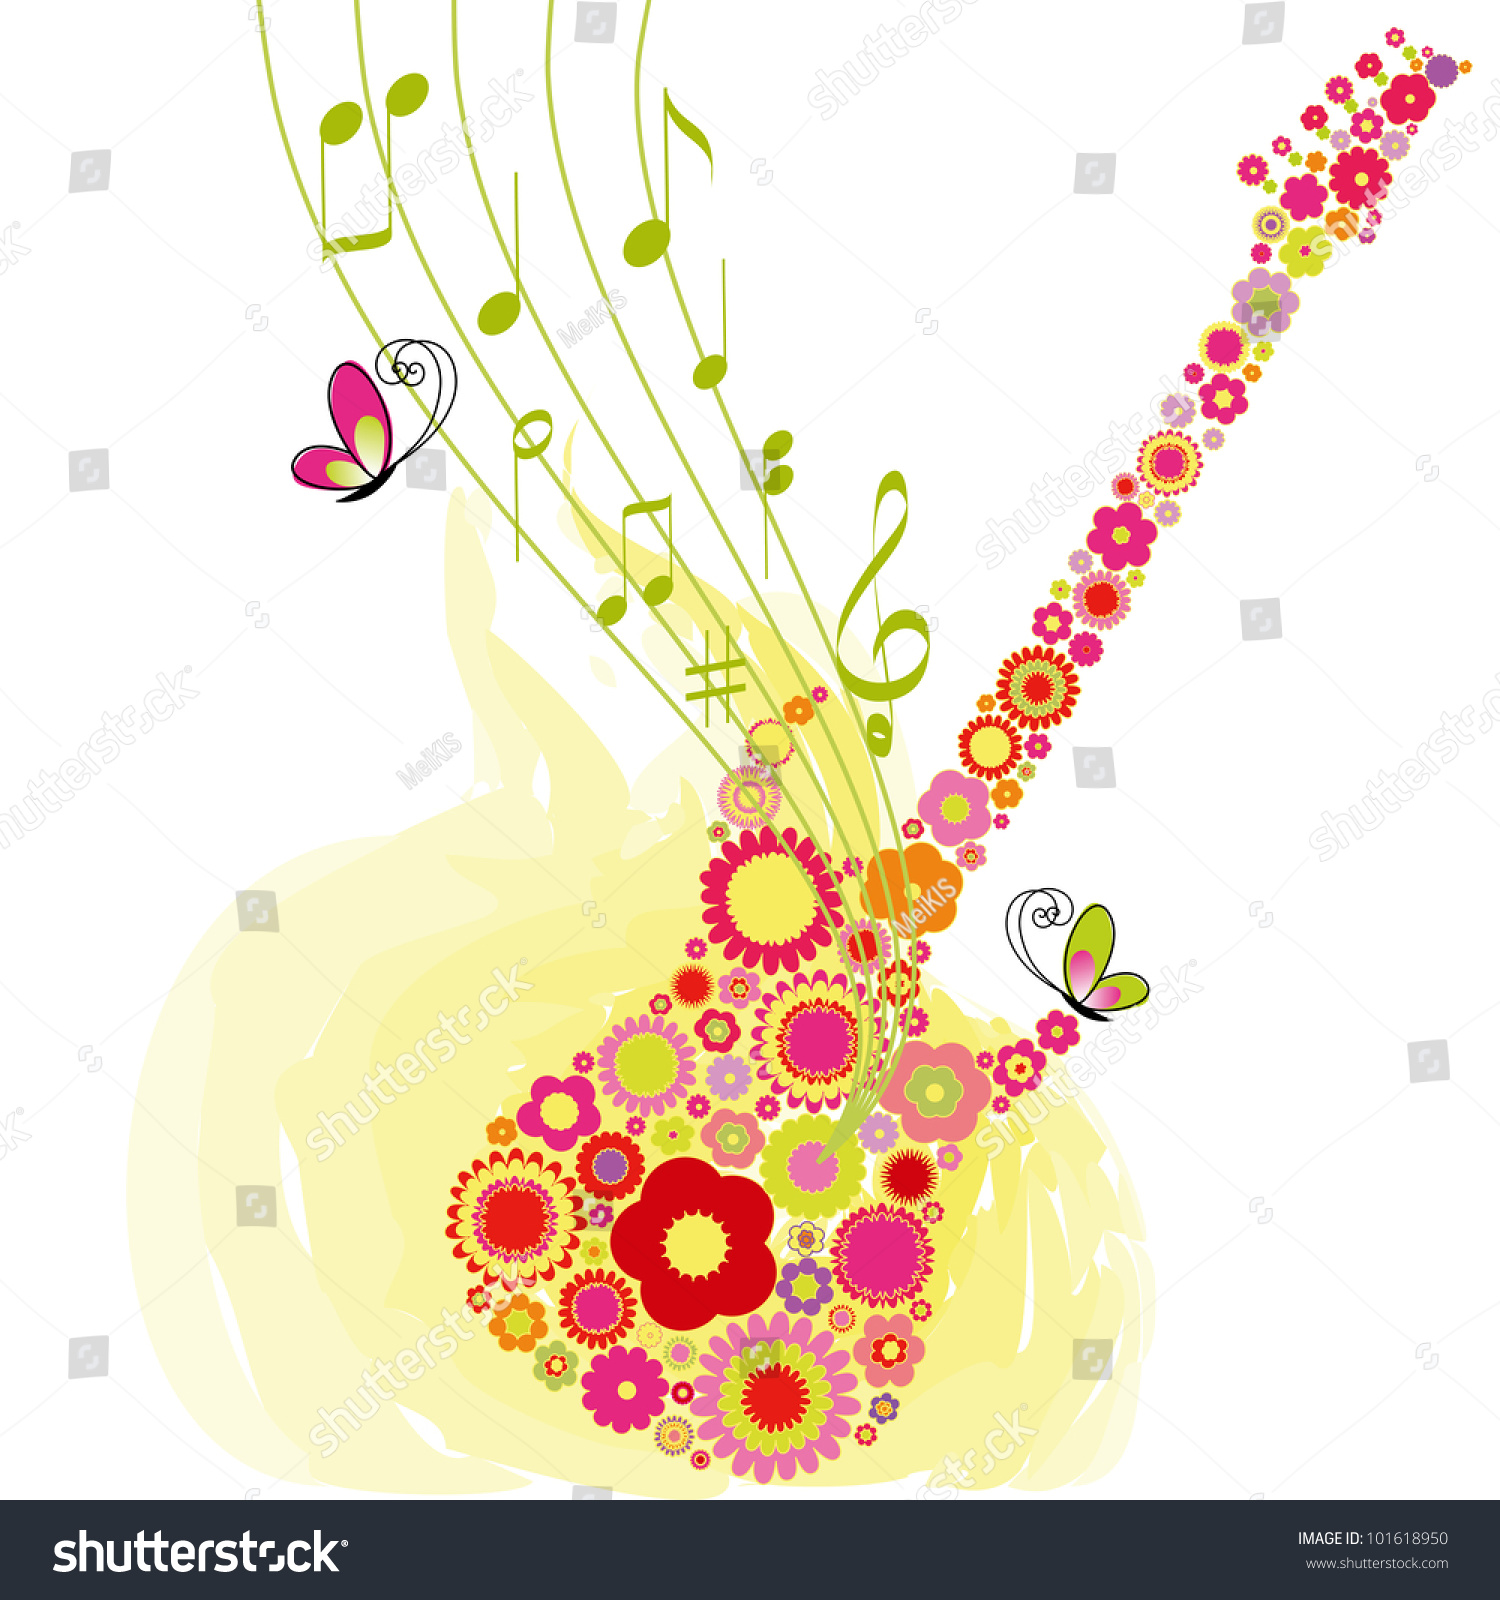 spring concert clipart - photo #38